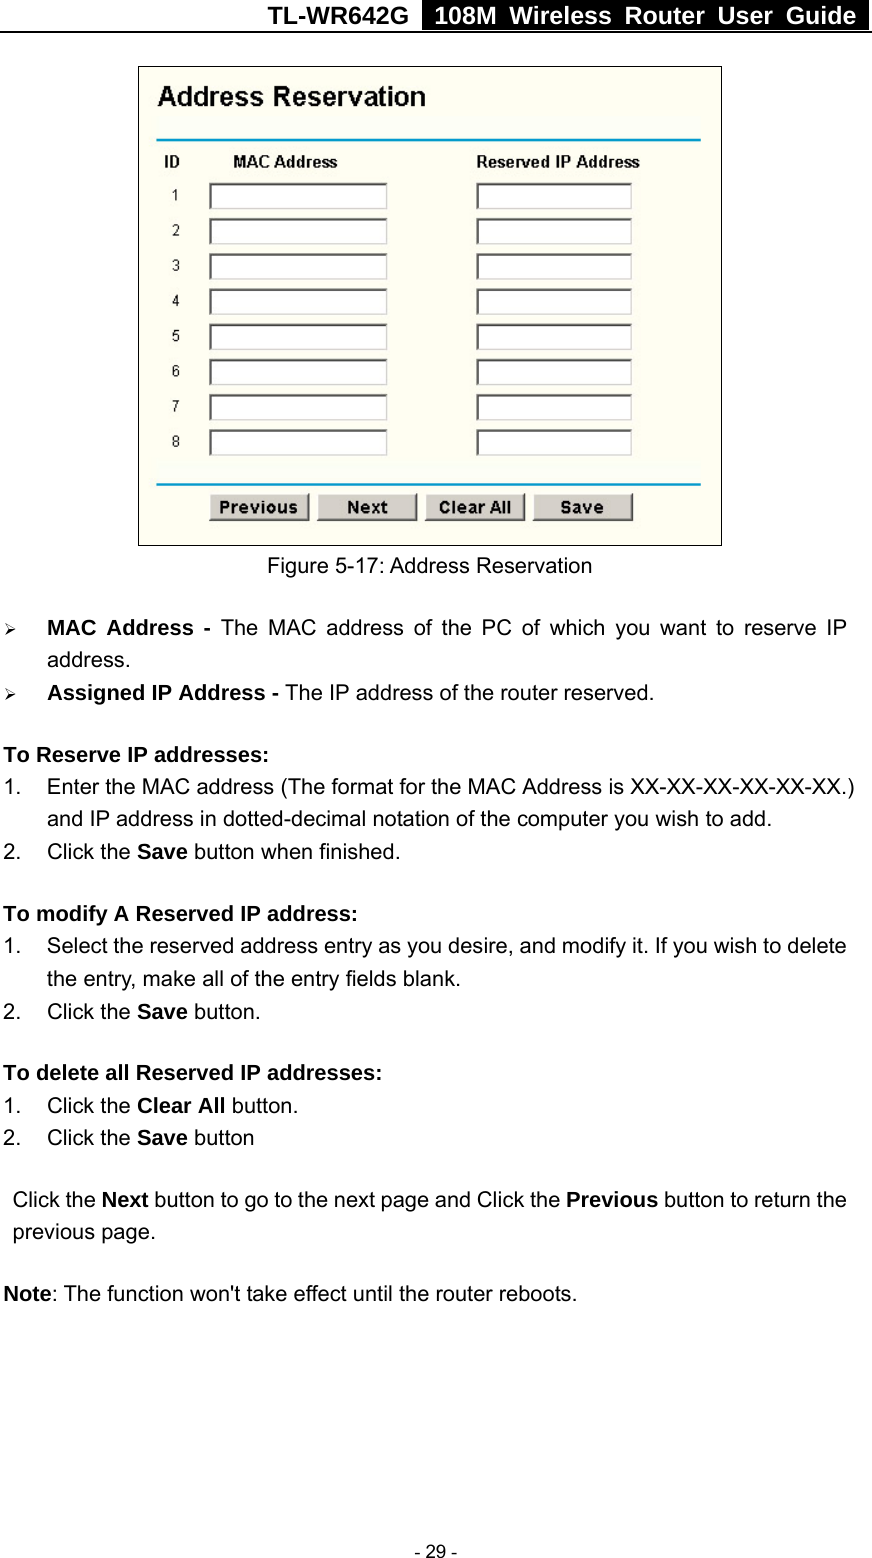 TL-WR642G   108M Wireless Router User Guide   - 29 -  Figure 5-17: Address Reservation ¾ MAC Address - The MAC address of the PC of which you want to reserve IP address. ¾ Assigned IP Address - The IP address of the router reserved. To Reserve IP addresses:  1.  Enter the MAC address (The format for the MAC Address is XX-XX-XX-XX-XX-XX.) and IP address in dotted-decimal notation of the computer you wish to add.   2. Click the Save button when finished.   To modify A Reserved IP address:  1.  Select the reserved address entry as you desire, and modify it. If you wish to delete the entry, make all of the entry fields blank. 2. Click the Save button.   To delete all Reserved IP addresses: 1. Click the Clear All button. 2. Click the Save button Click the Next button to go to the next page and Click the Previous button to return the previous page. Note: The function won&apos;t take effect until the router reboots. 